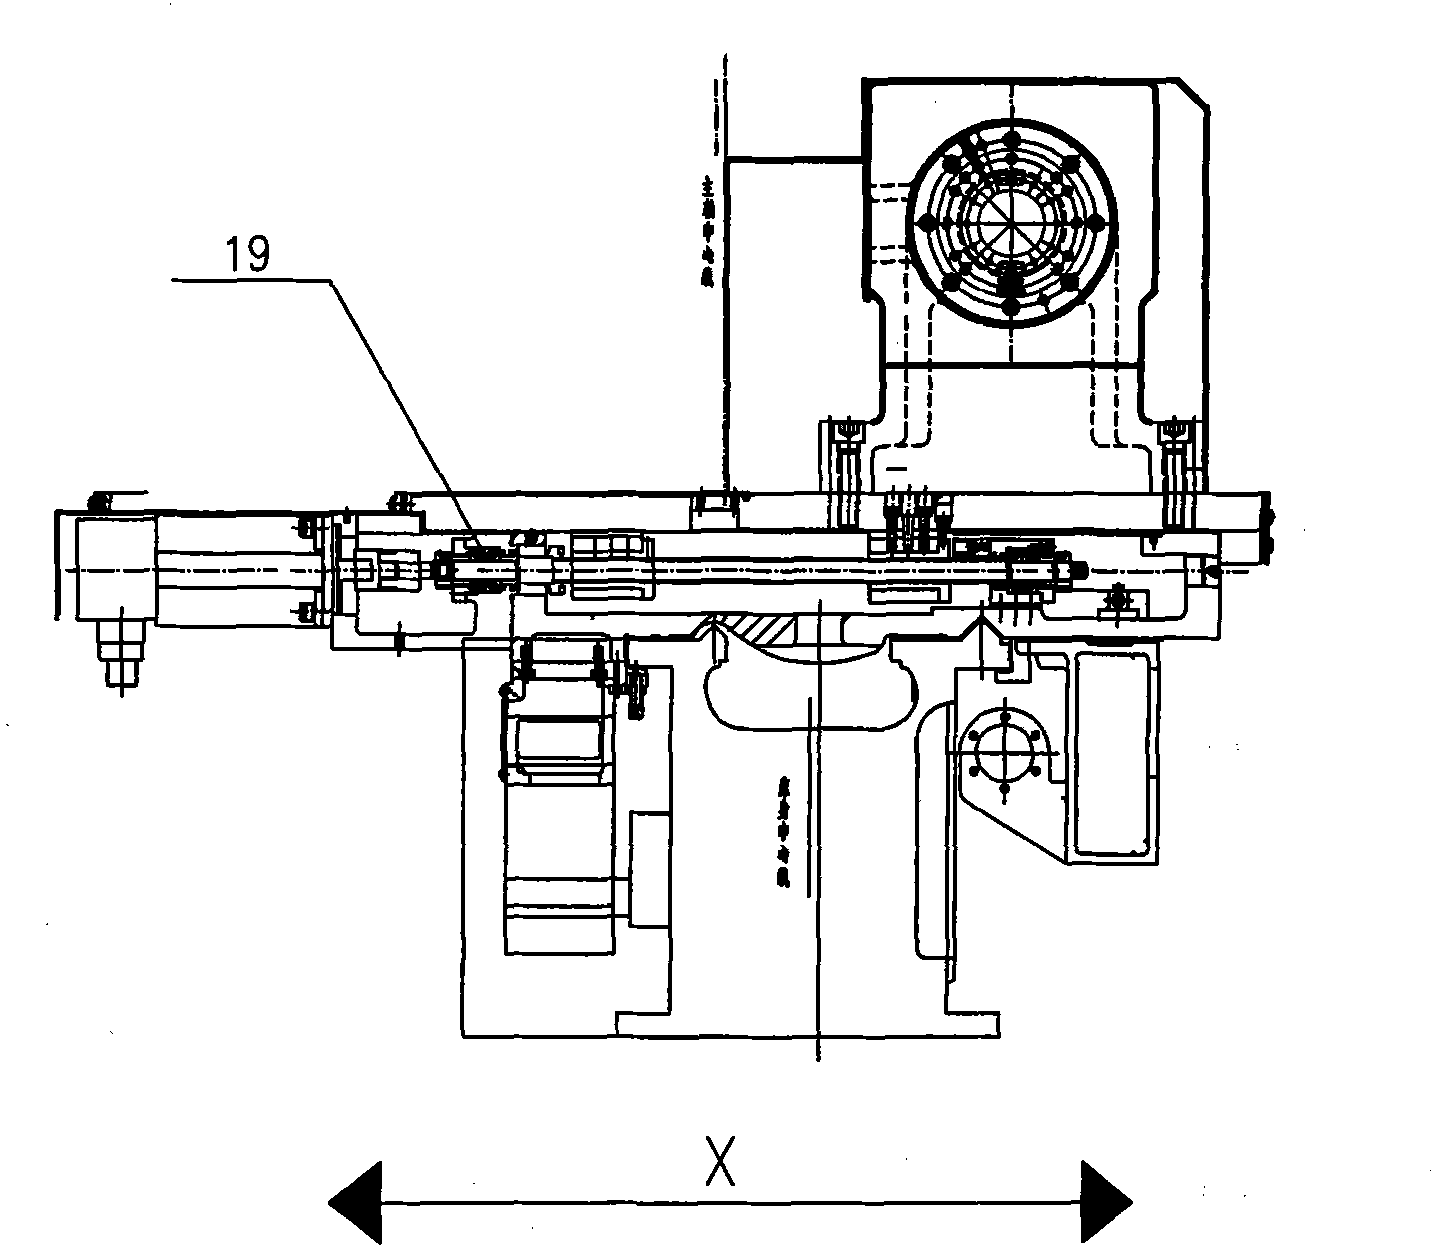 Numerical control machine tool for machining bearing retainer